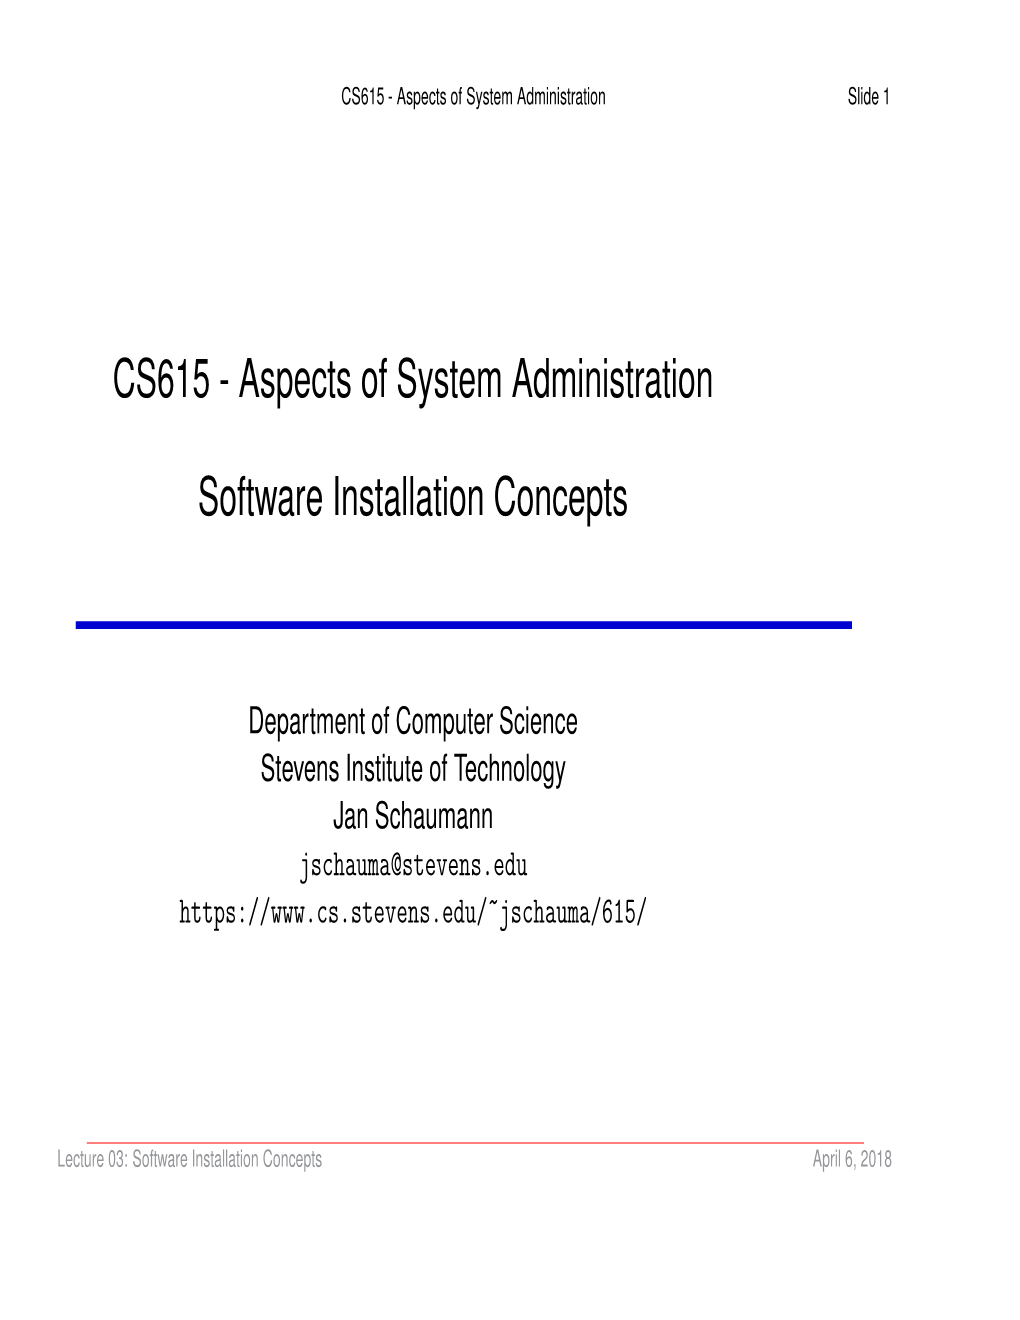 CS615 - Aspects of System Administration Slide 1